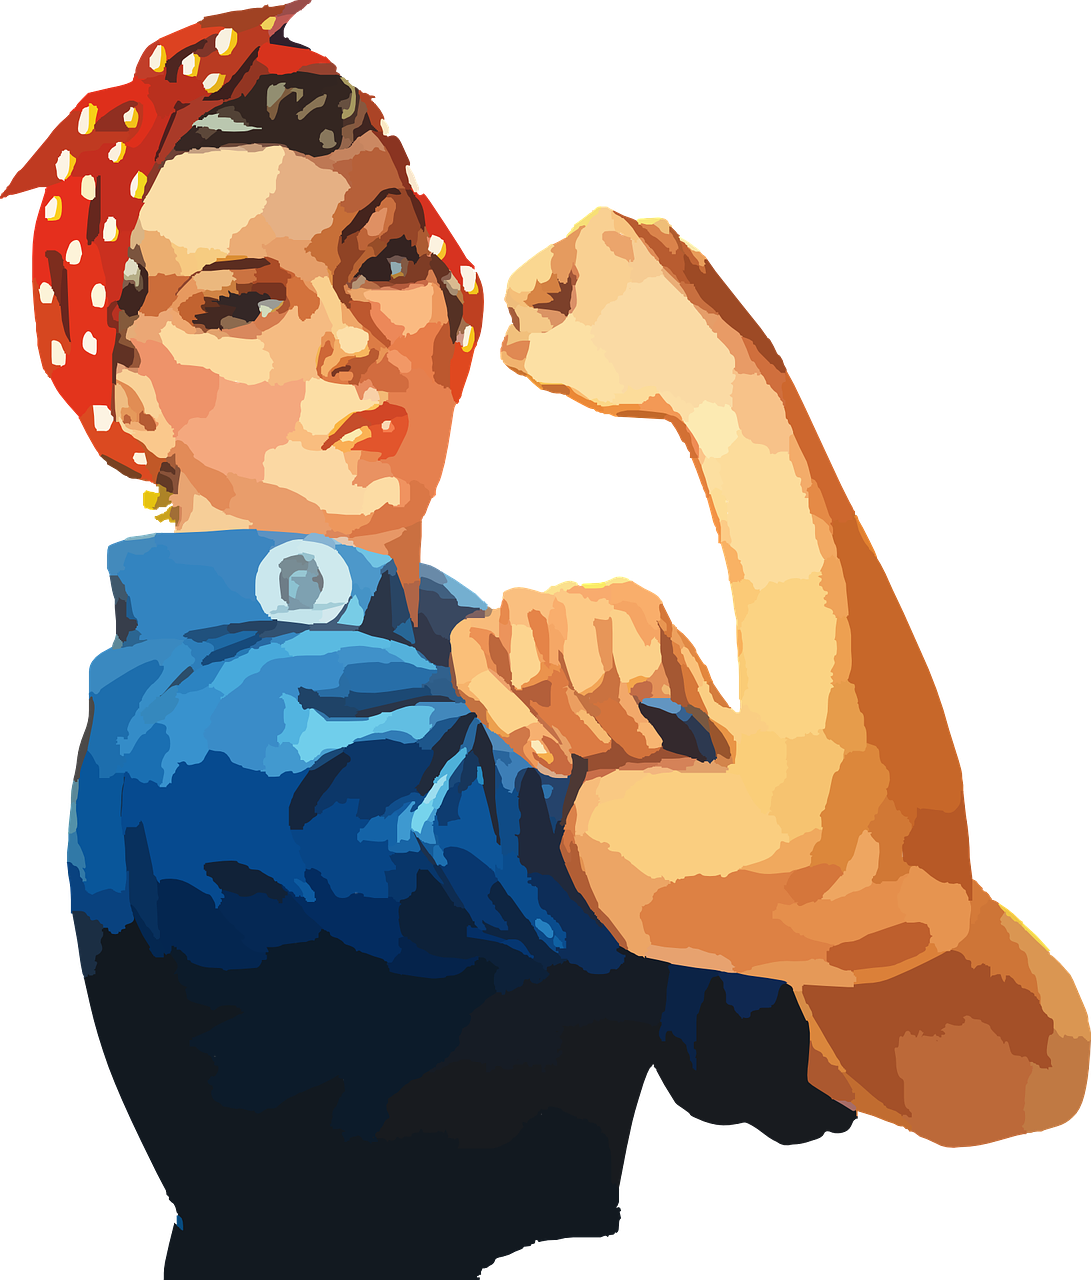 confident girl clipart image